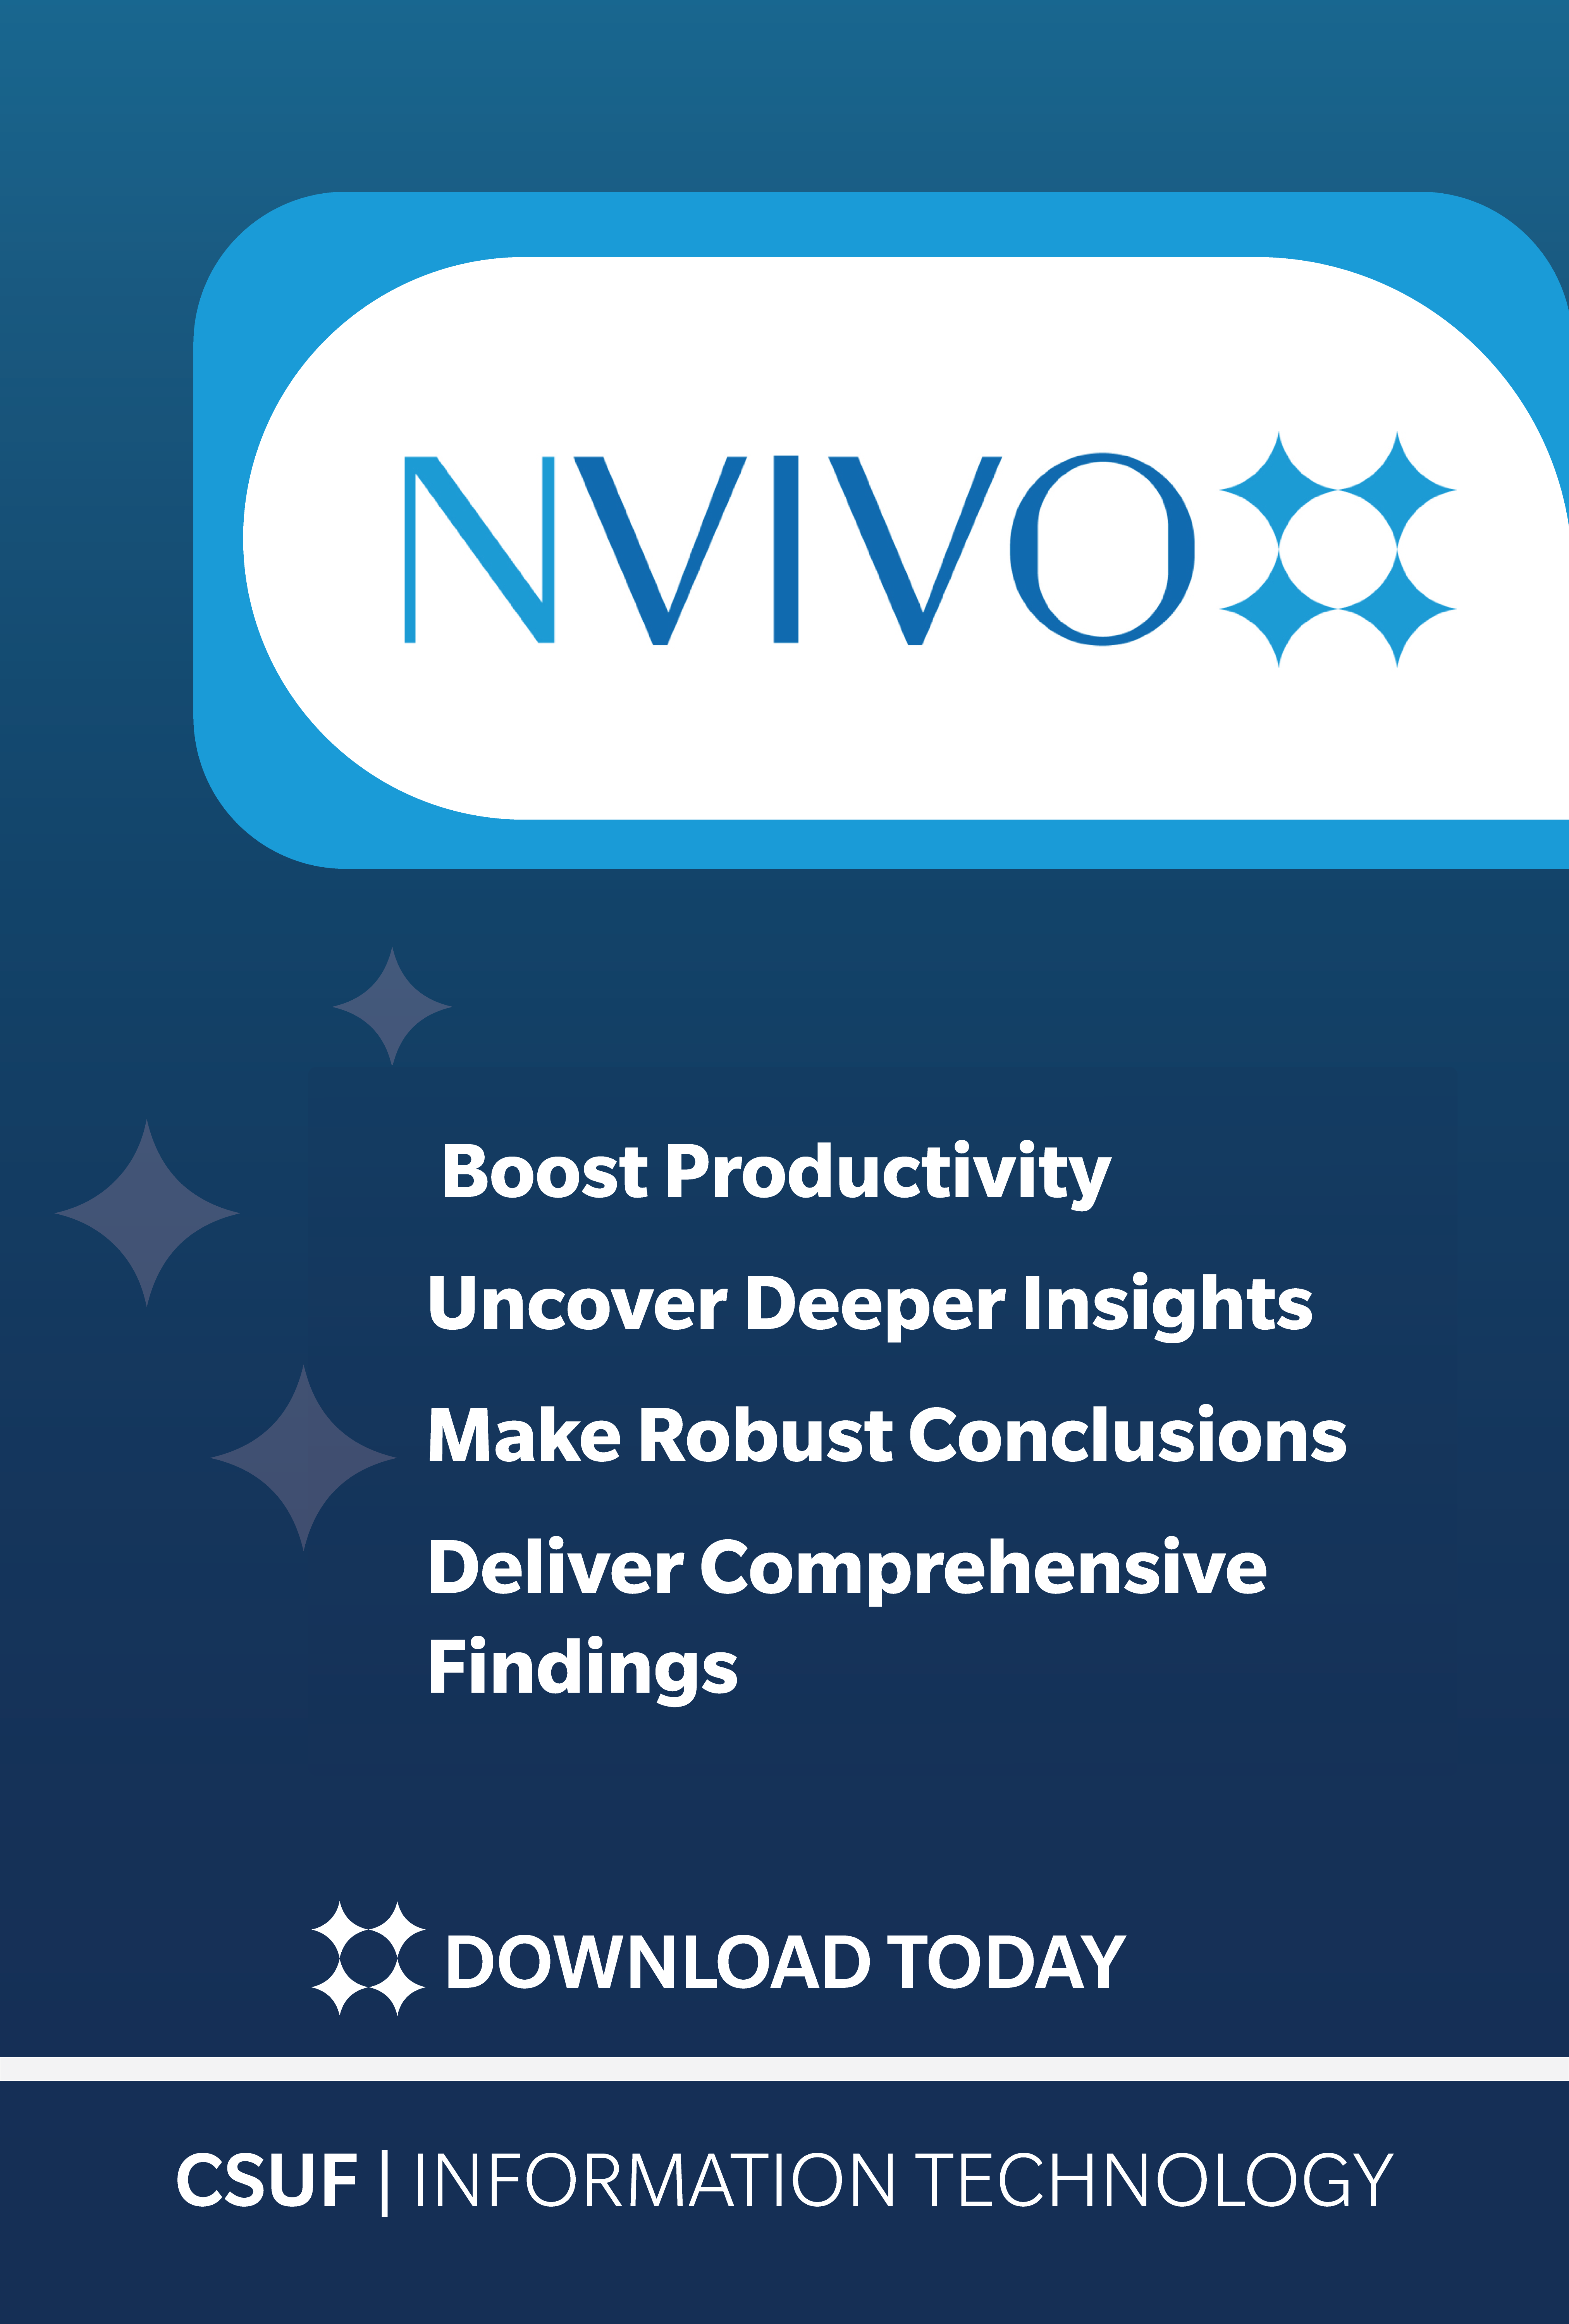 NVIVO software poster, boost productivity, uncover deeper insights, make robust conclusions, deliver comprehensive findings